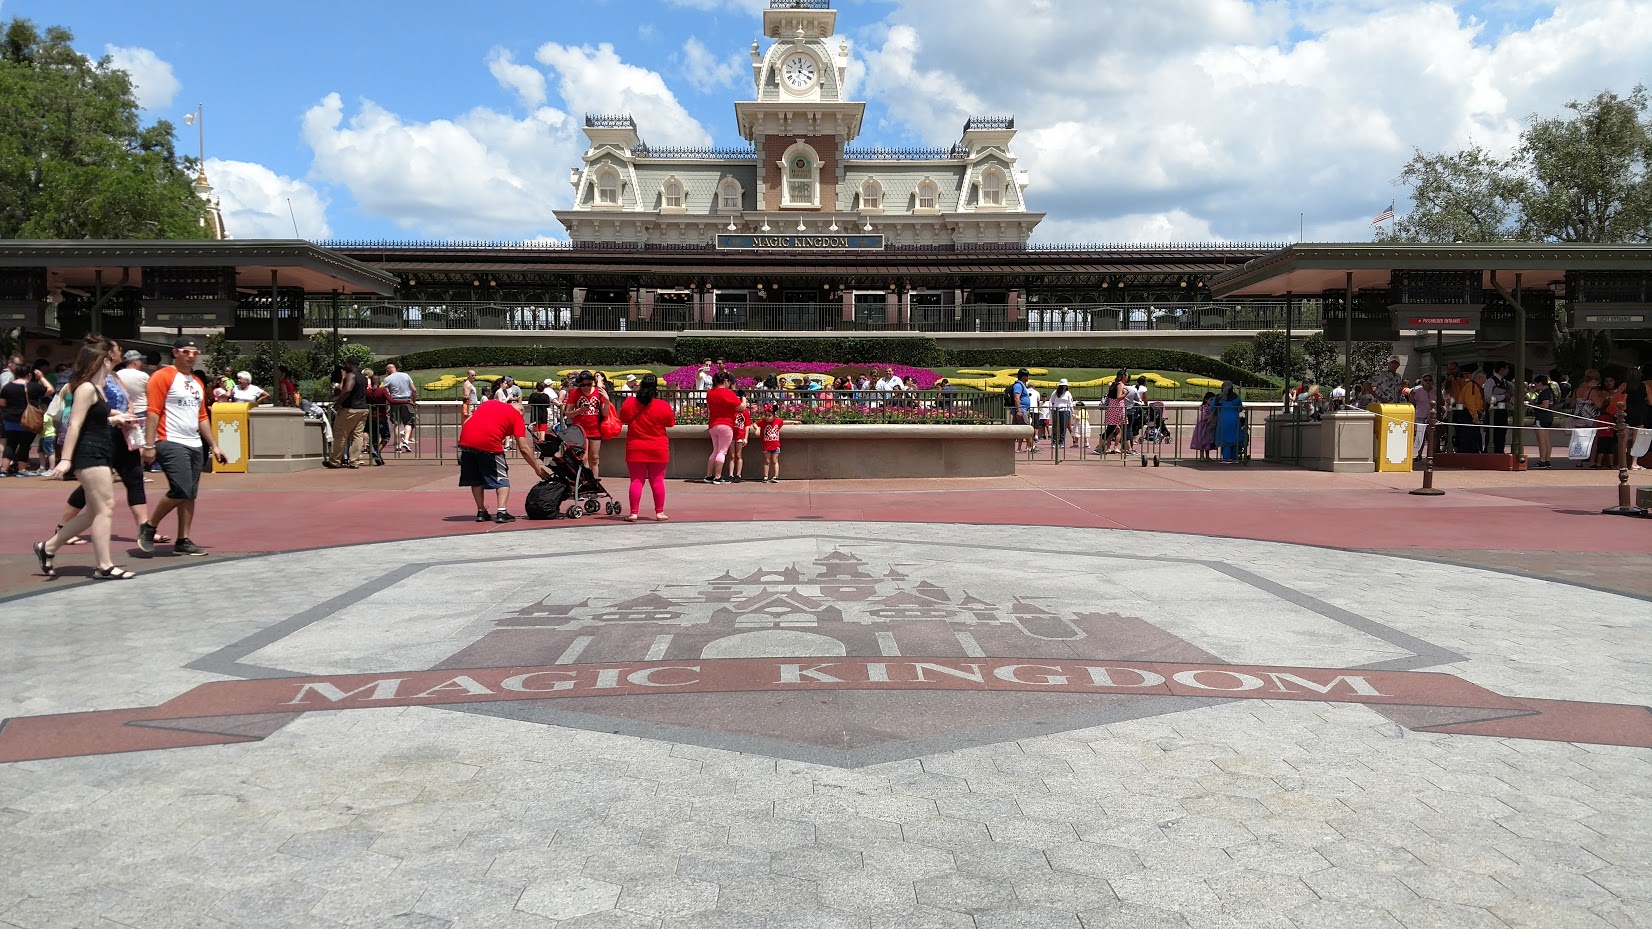 Grandmother who was arrested for bringing CBD oil into the Magic Kingdom files lawsuit